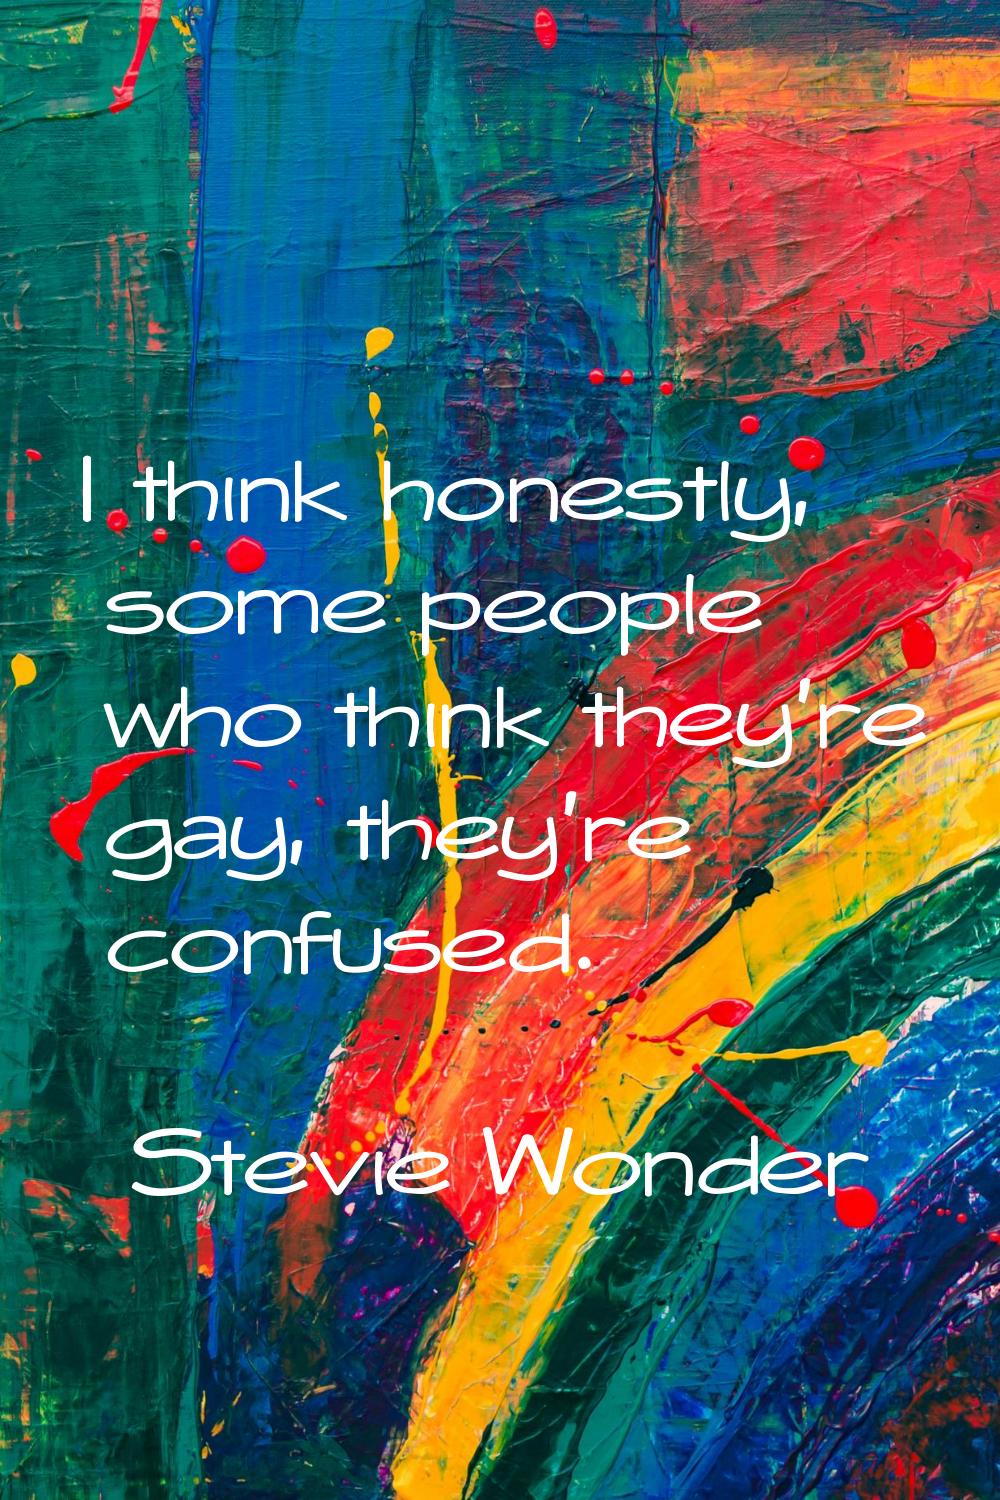 I think honestly, some people who think they're gay, they're confused.